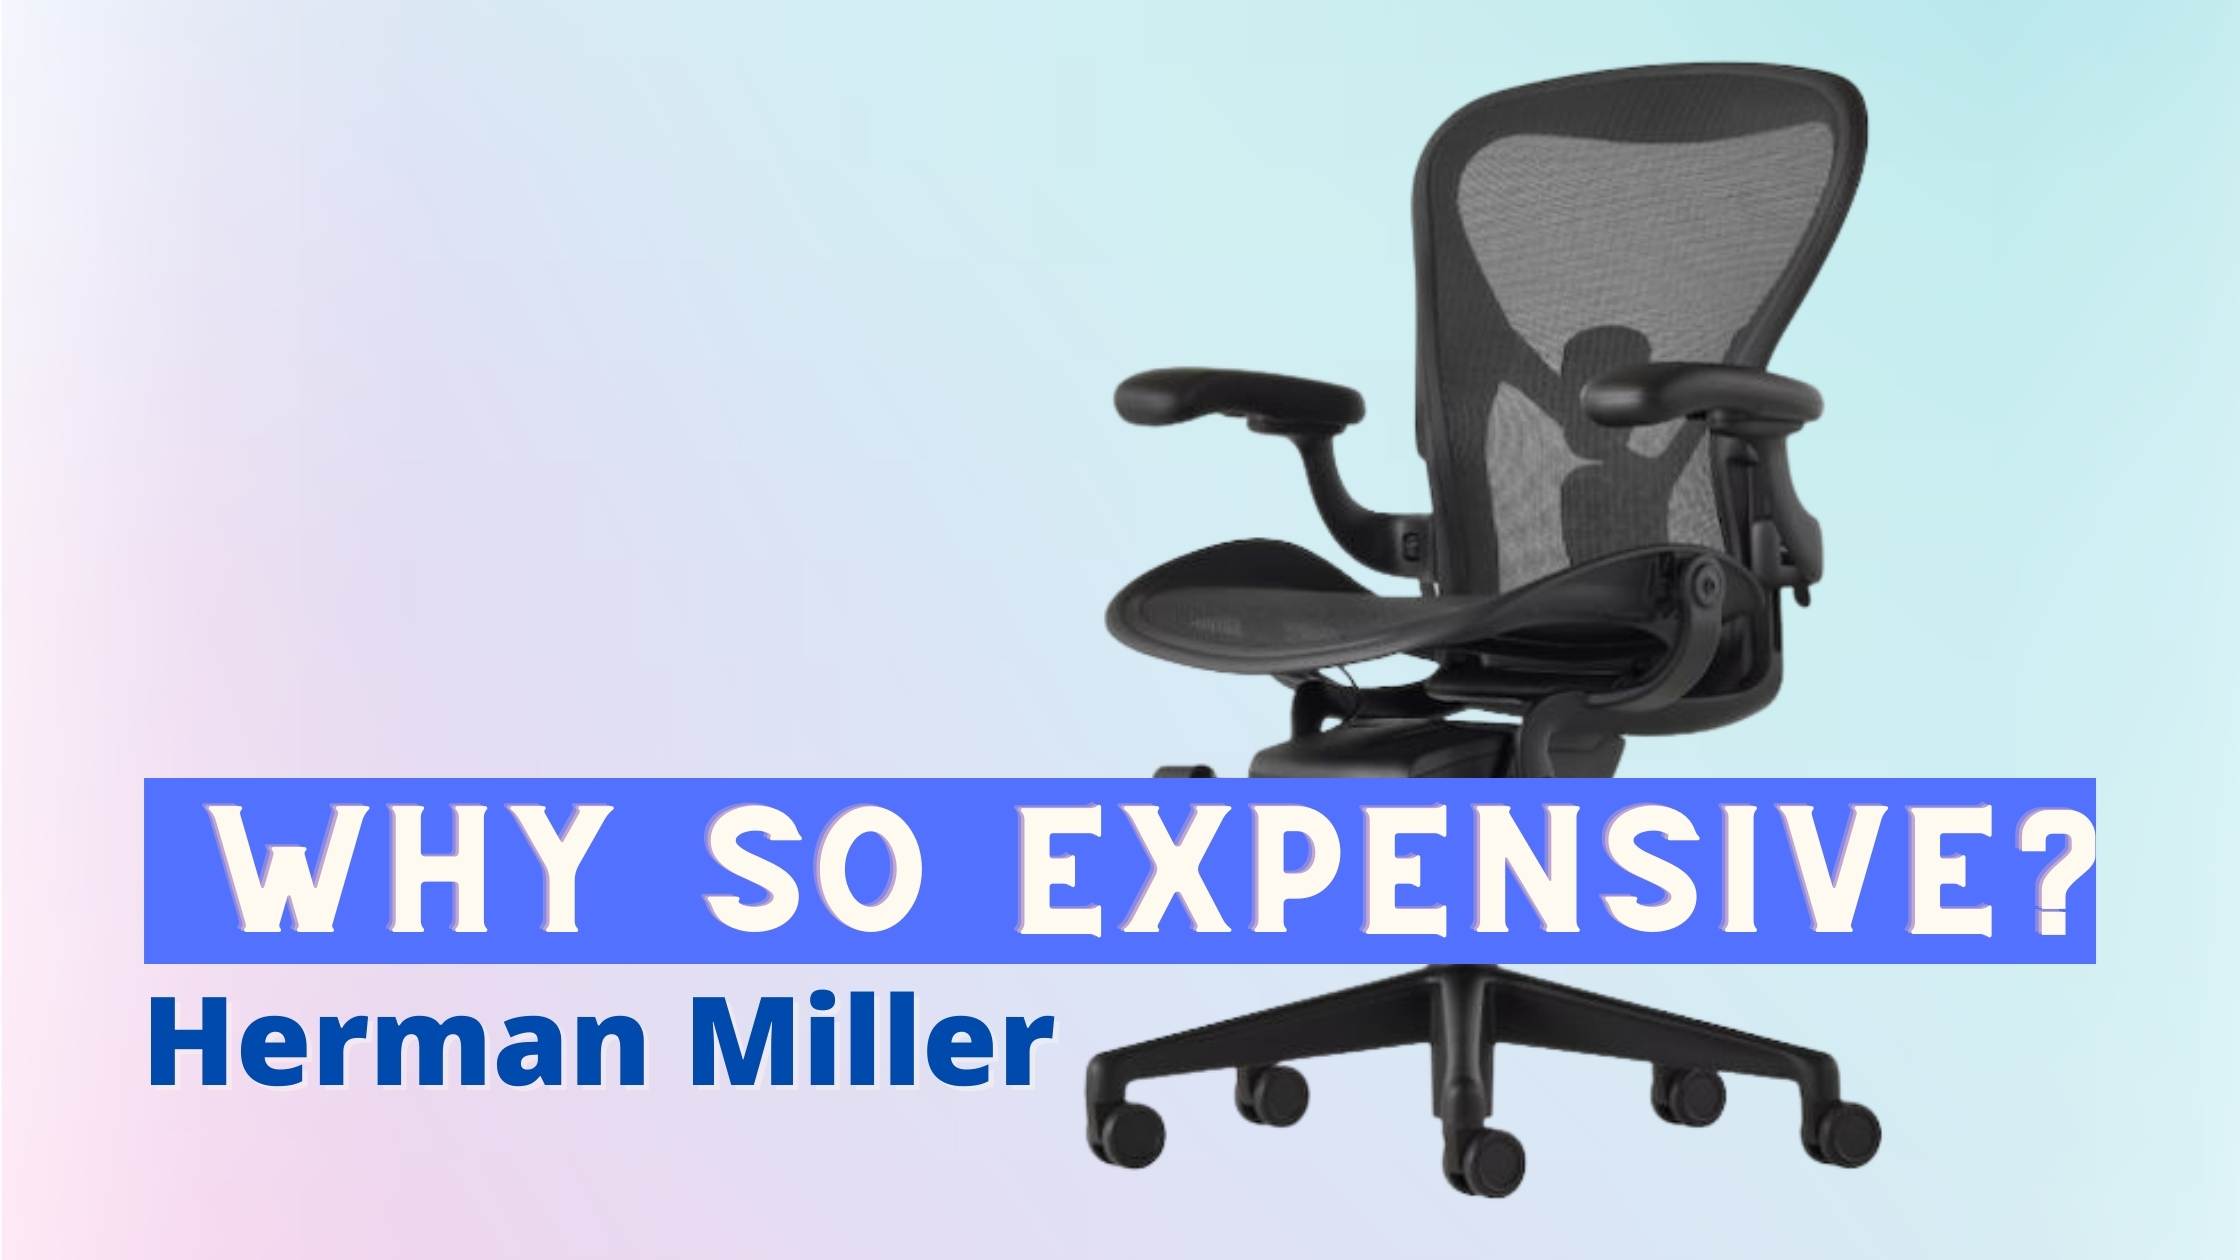 Why are Herman Miller chairs so expensive?